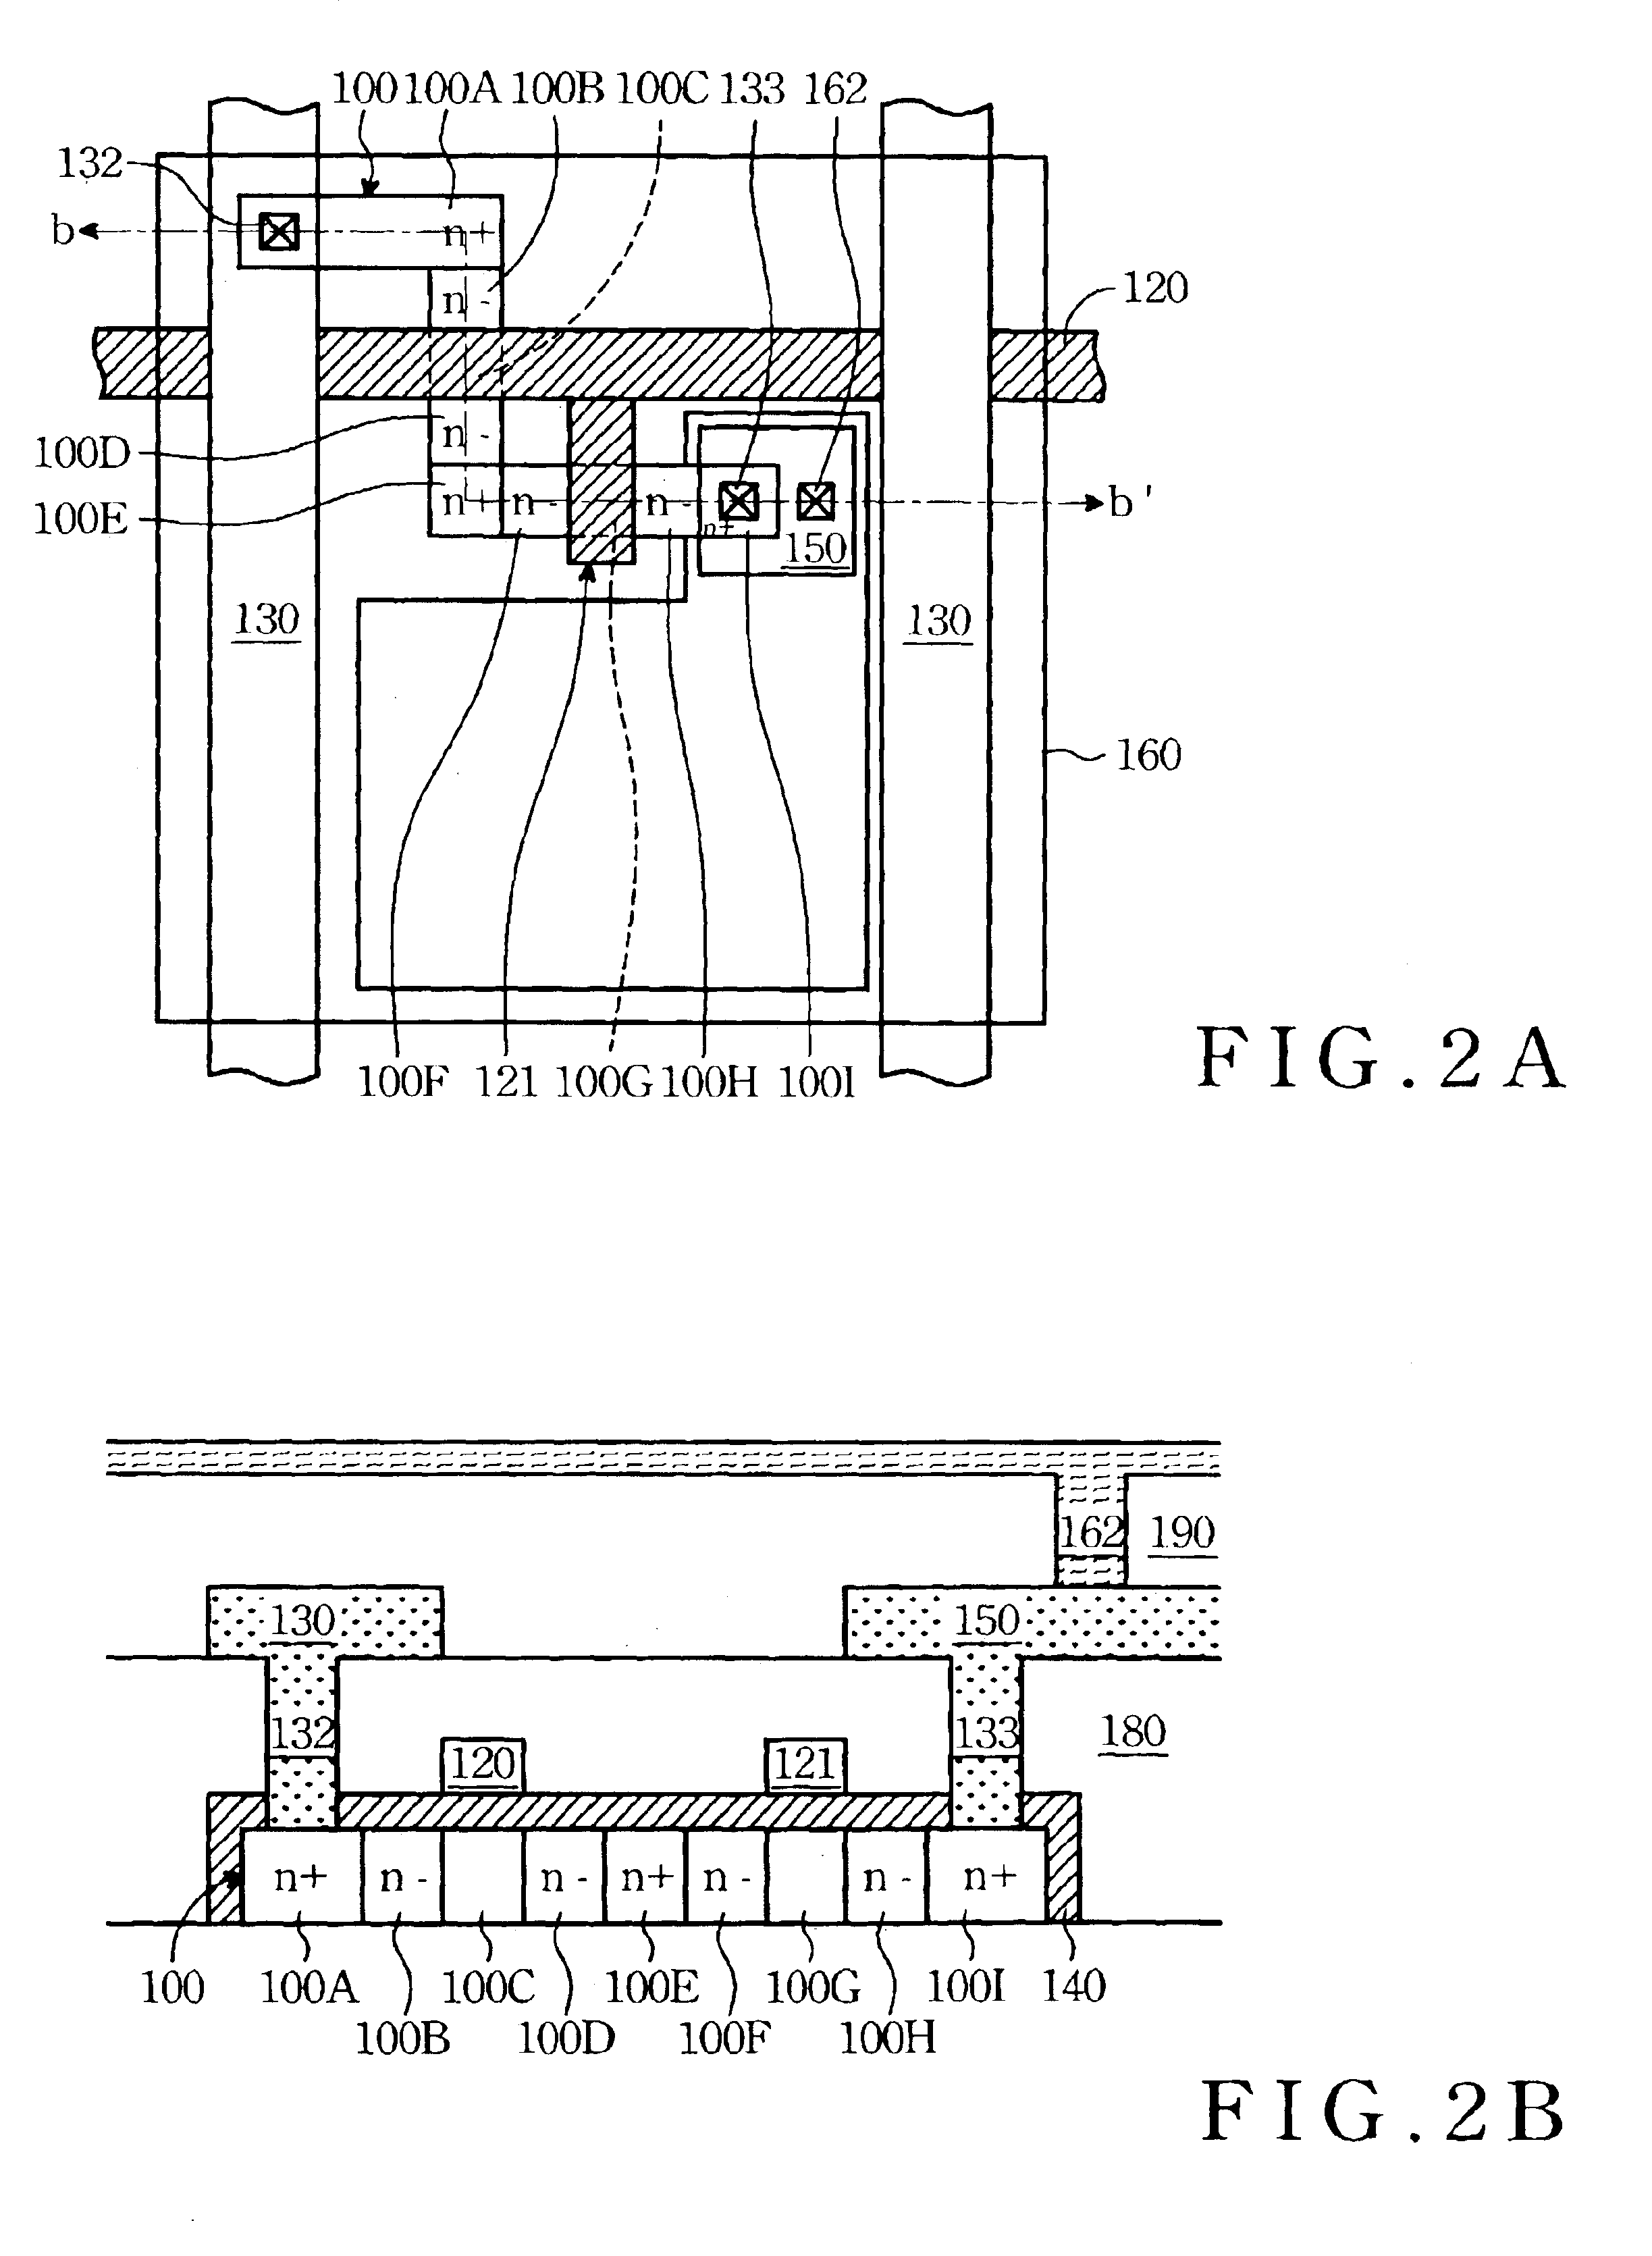 Dual gate layout for thin film transistor